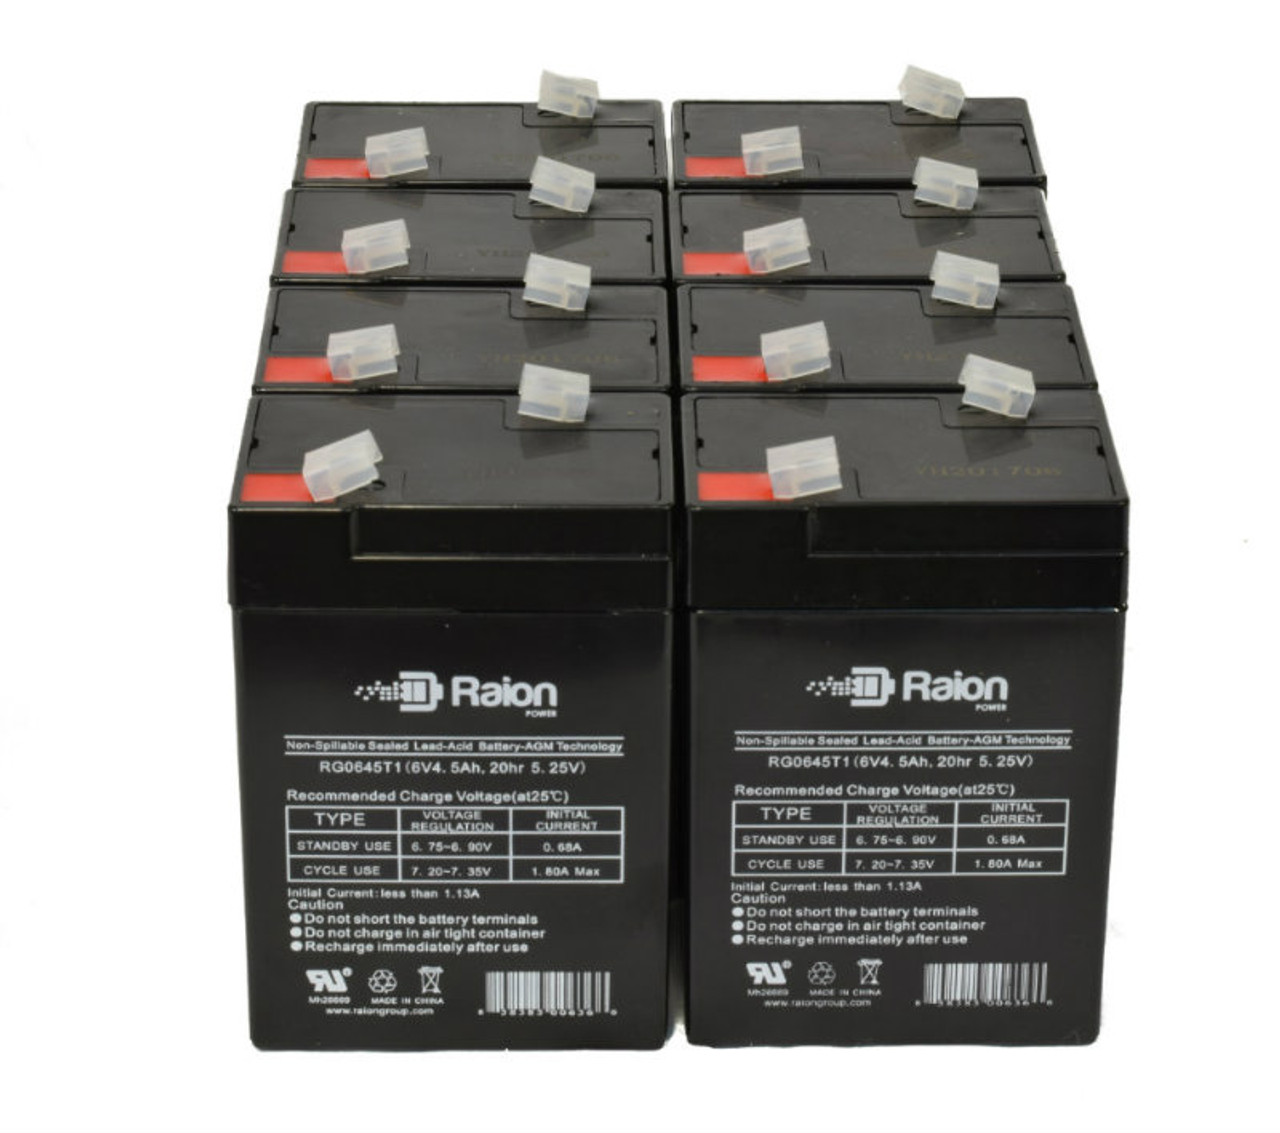 Raion Power 6 Volt 4.5Ah RG0645T1 Replacement Battery for Taico TP6-4.5 - 8 Pack